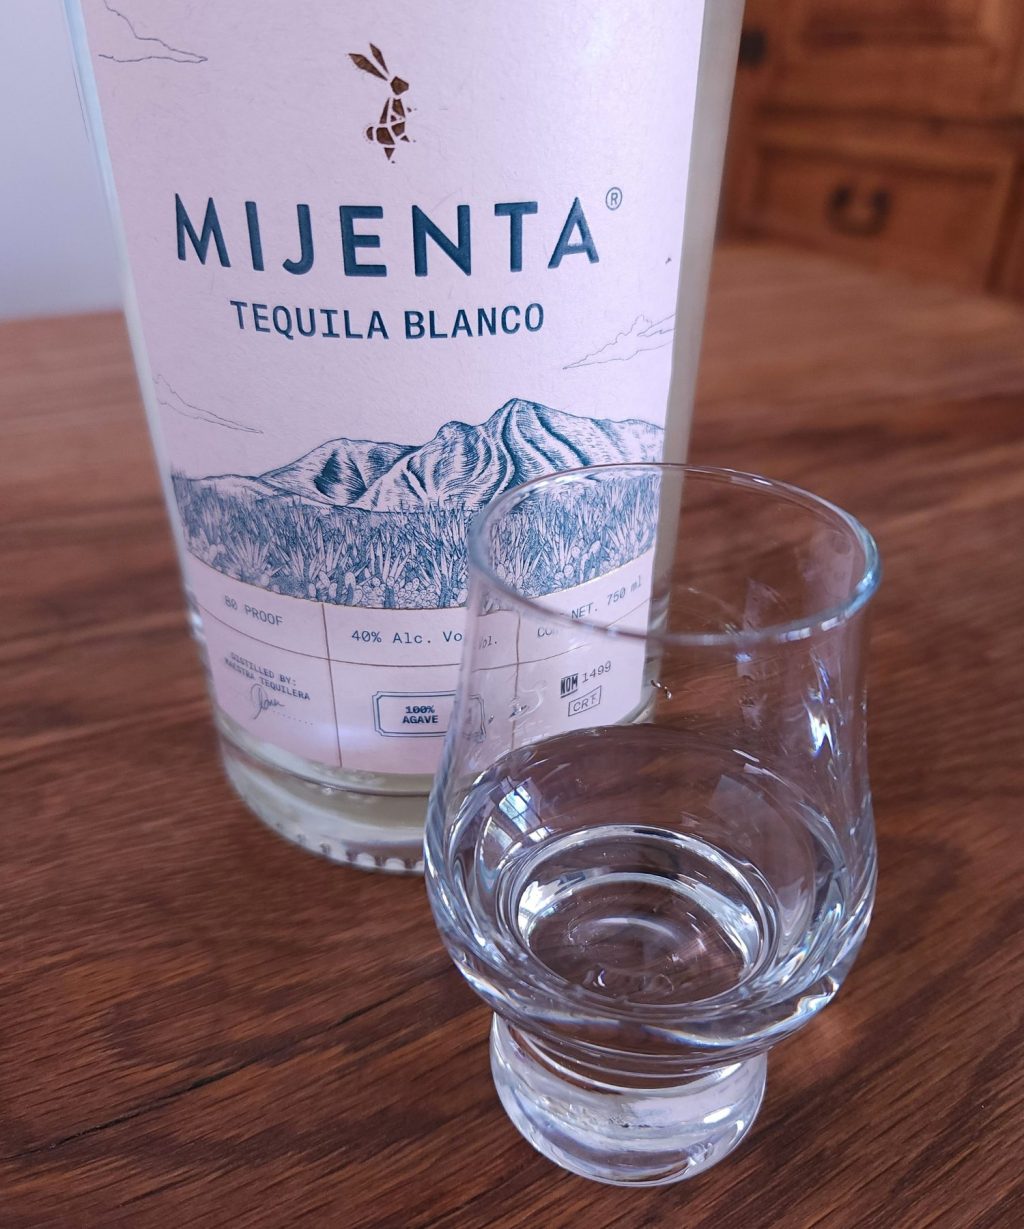 Small snifter glass with clear liquid, next to a bottle of Mijenta Blanco Tequila with only the label showing, both sitting on a wooden table